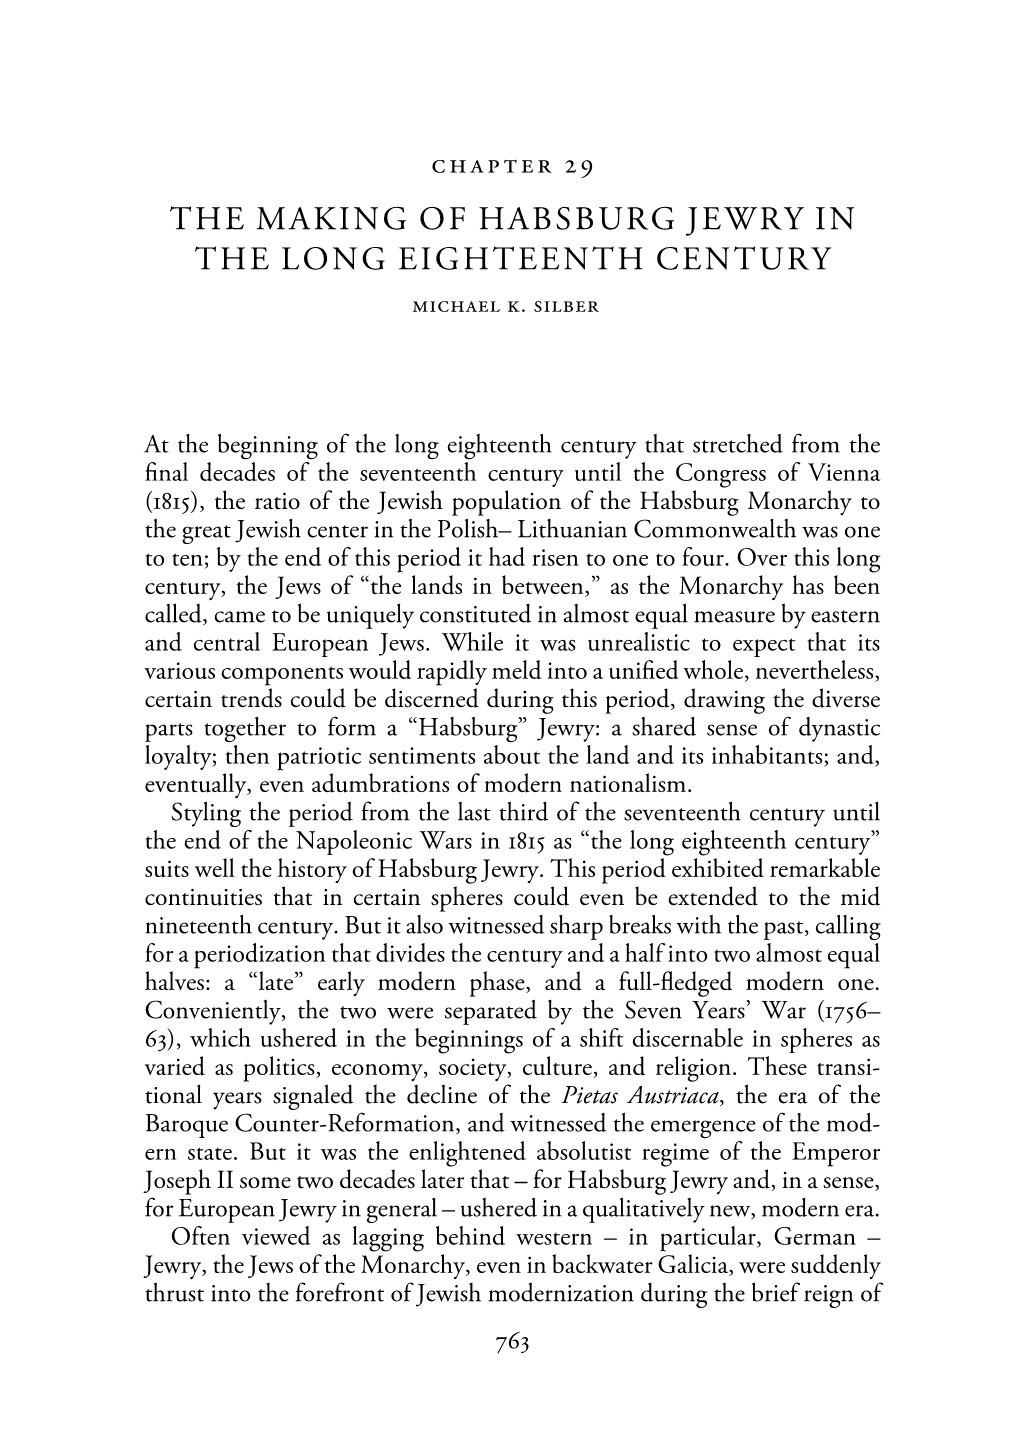 THE MAKING of HABSBURG JEWRY in the LONG EIGHTEENTH CENTURY Michael K